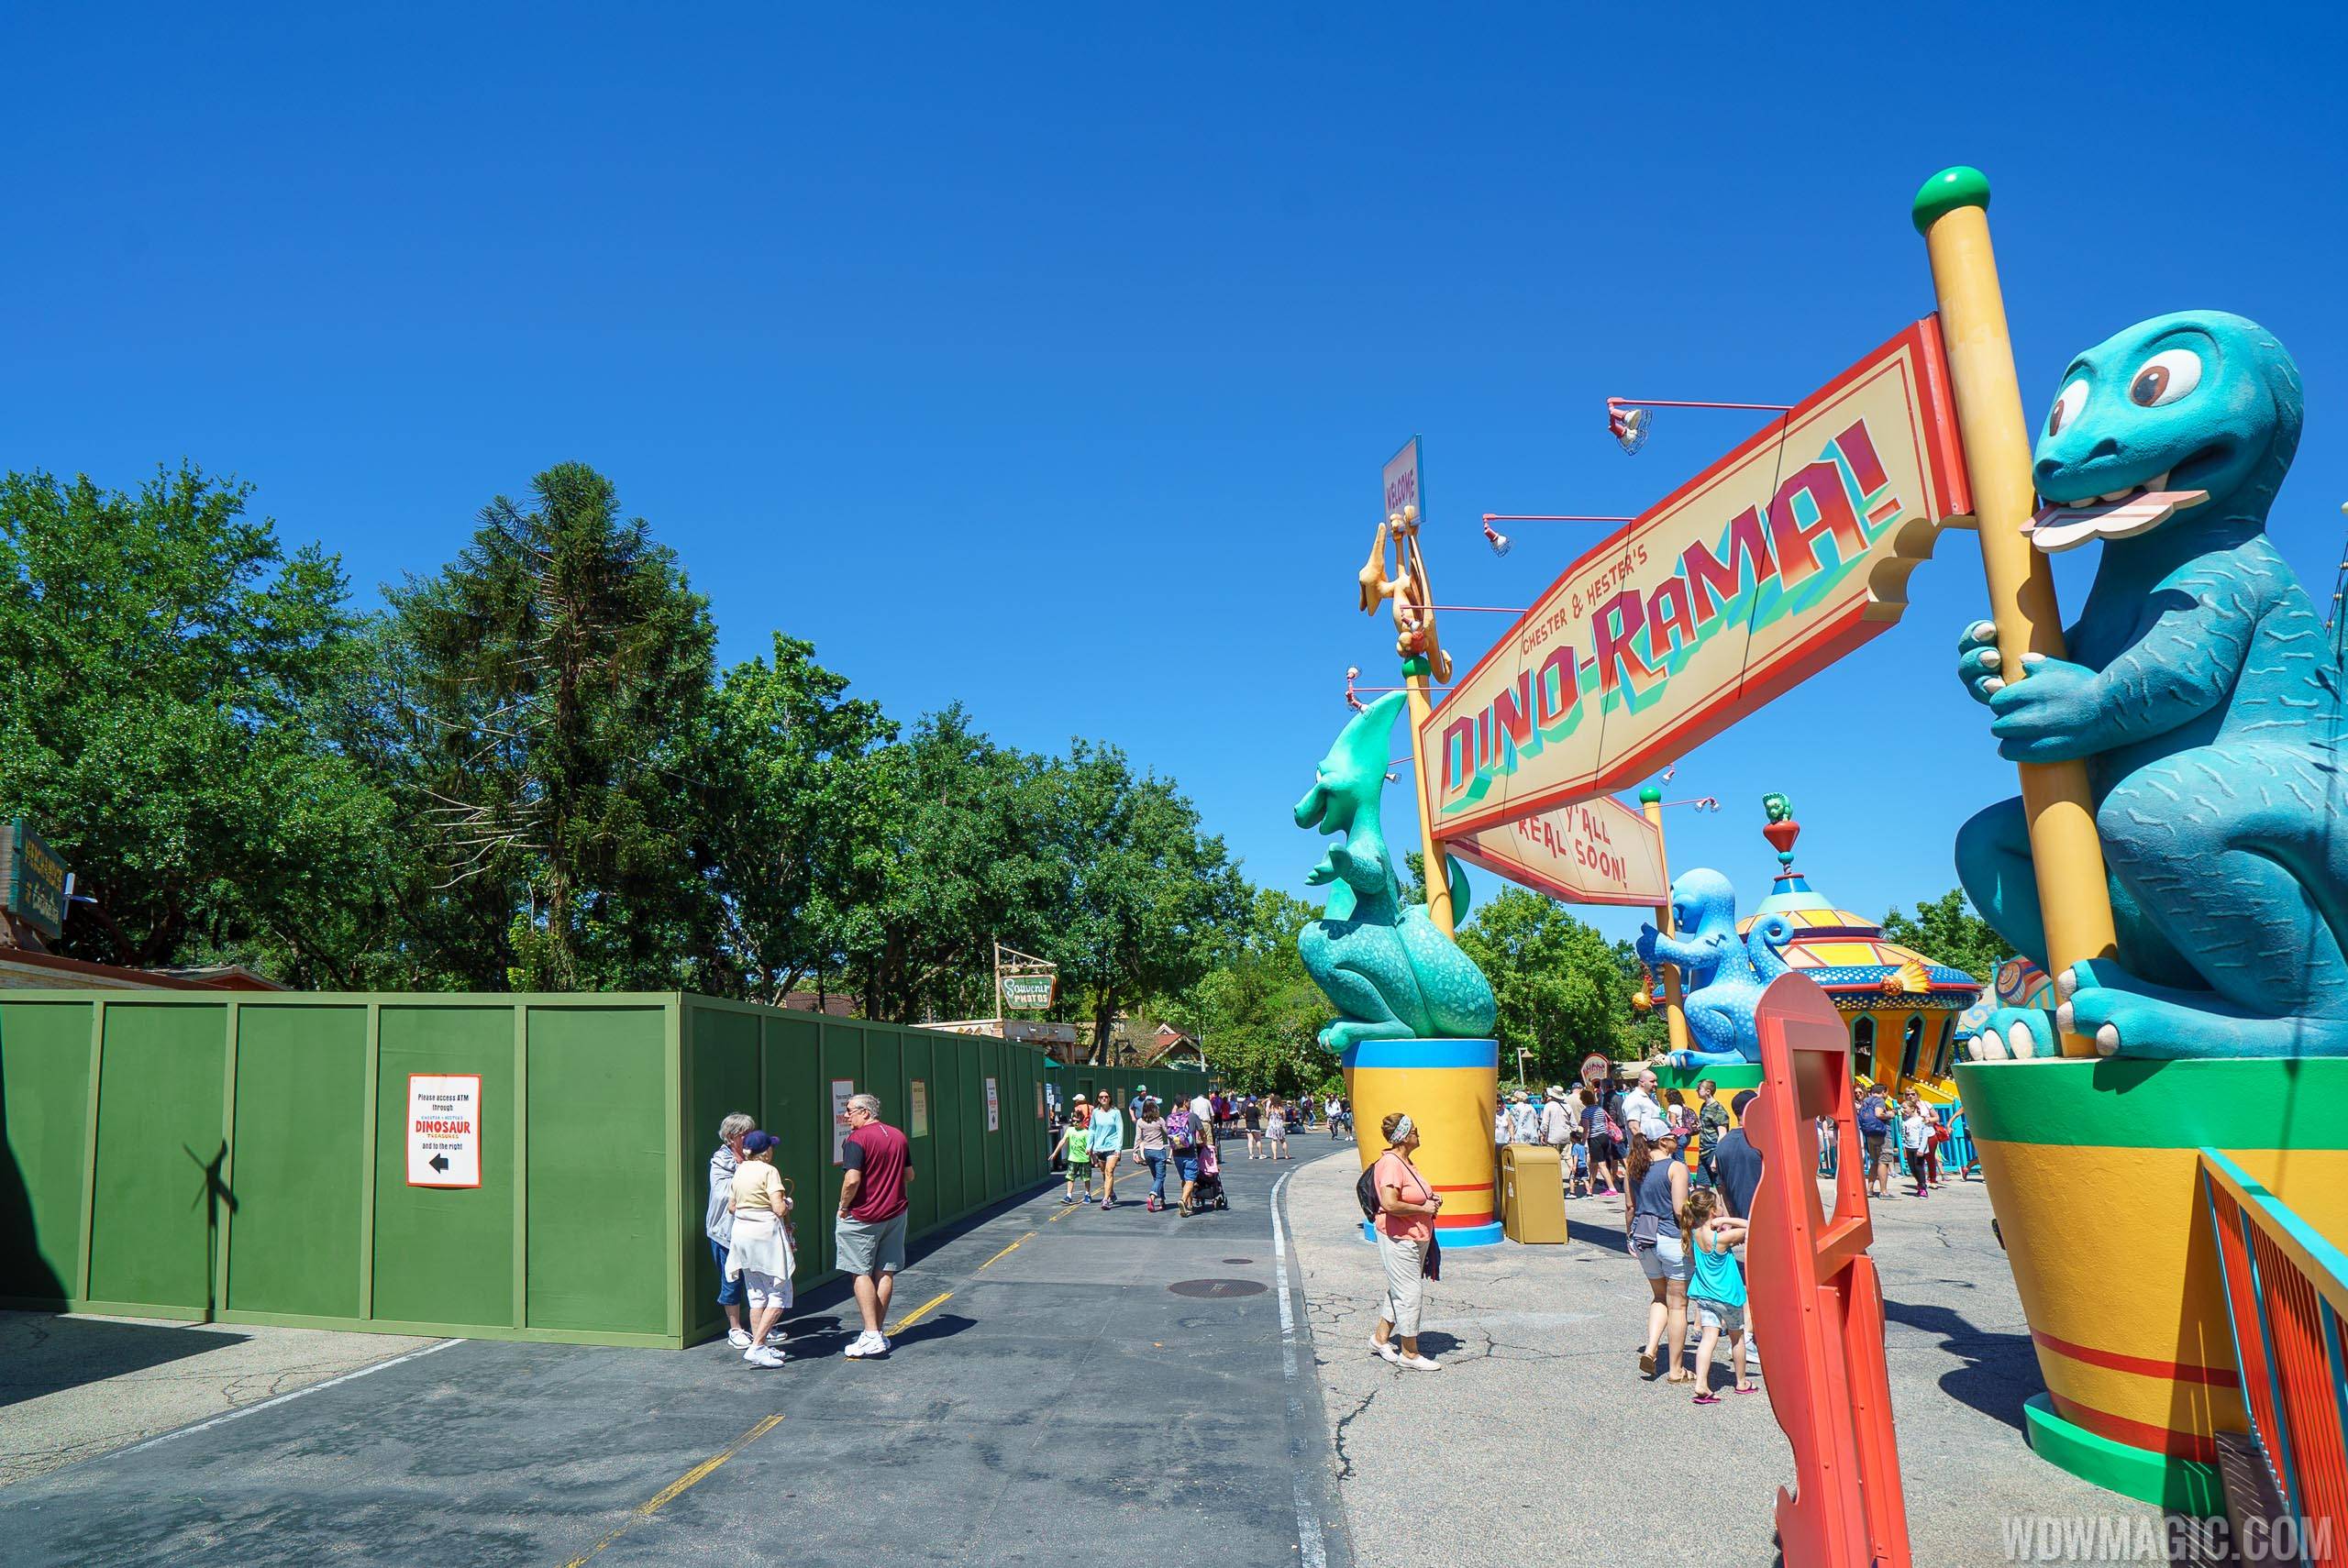 PHOTOS - Construction walls up in DinoLand U.S.A. for Donald's Dino Bash!